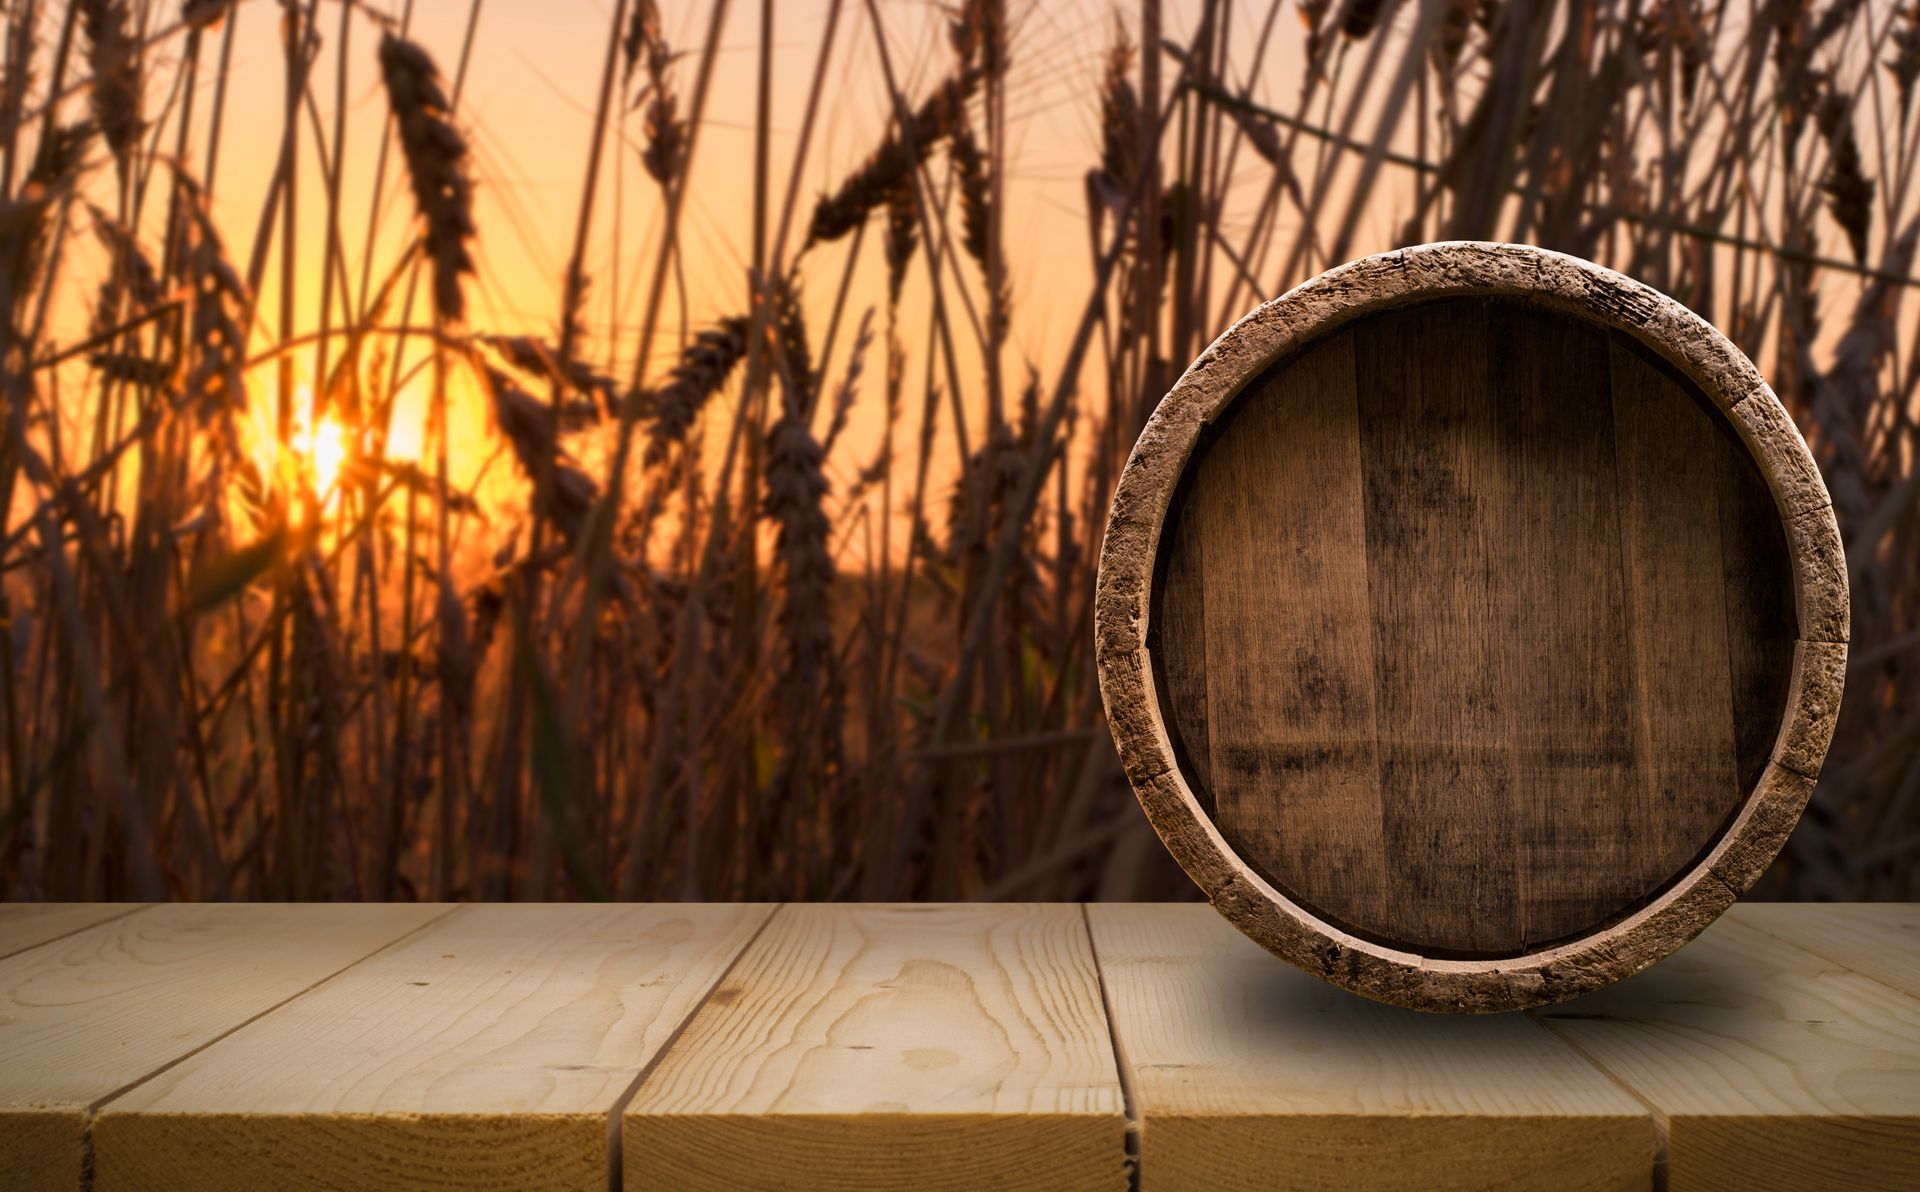 A wooden barrel is sitting on a wooden table in front of a field at sunset.